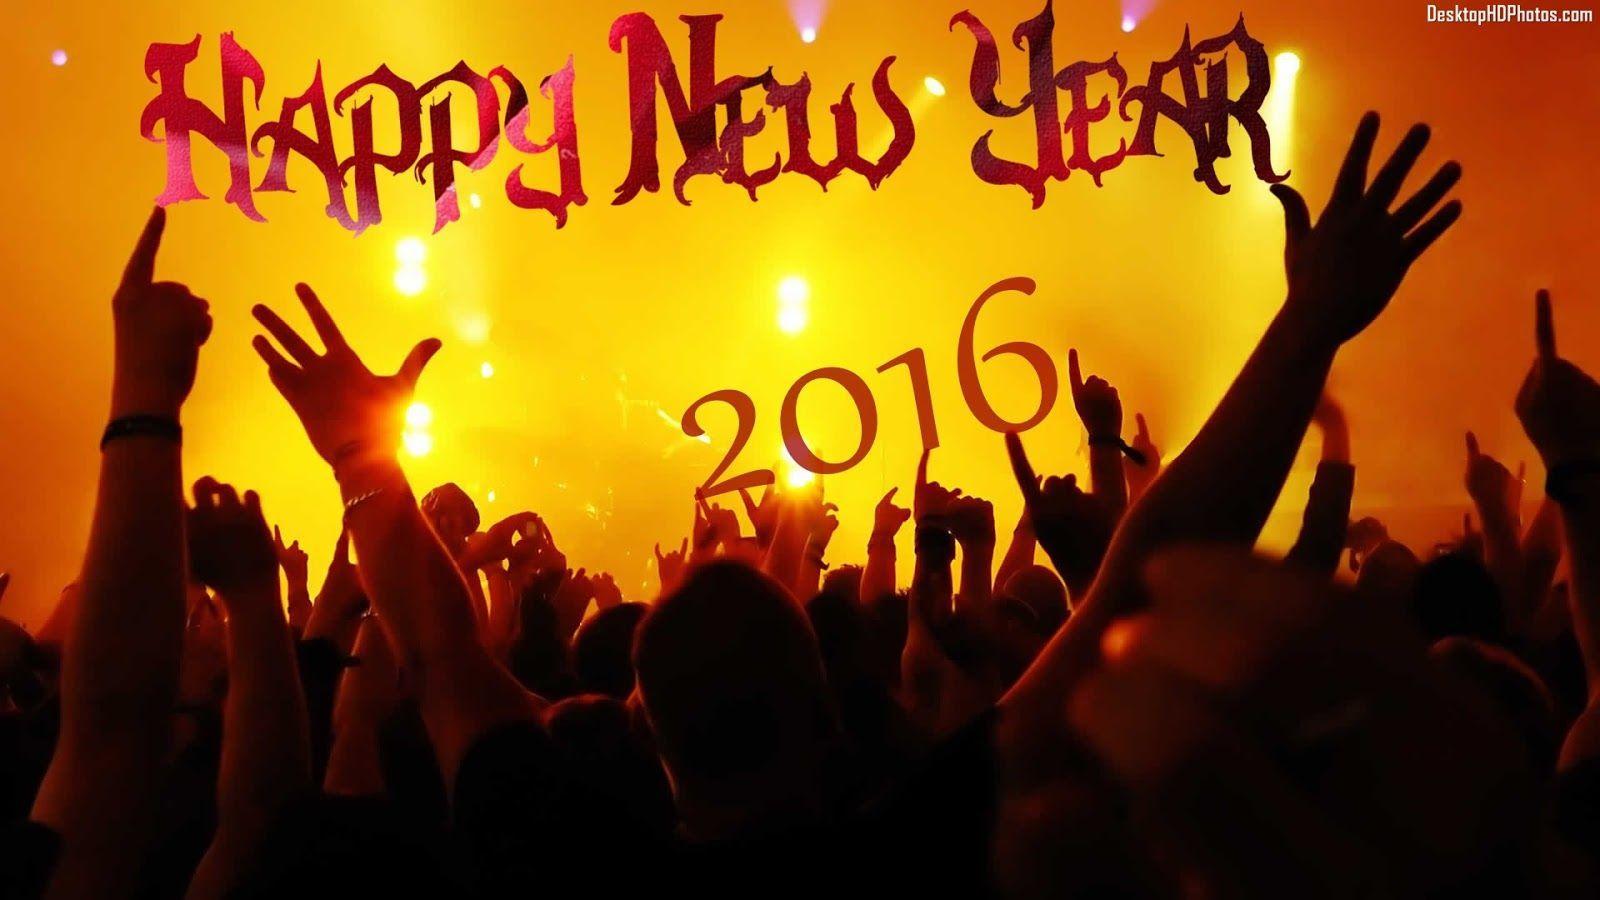 1st January 2016 Happy New Year Greetings SMS Wishes